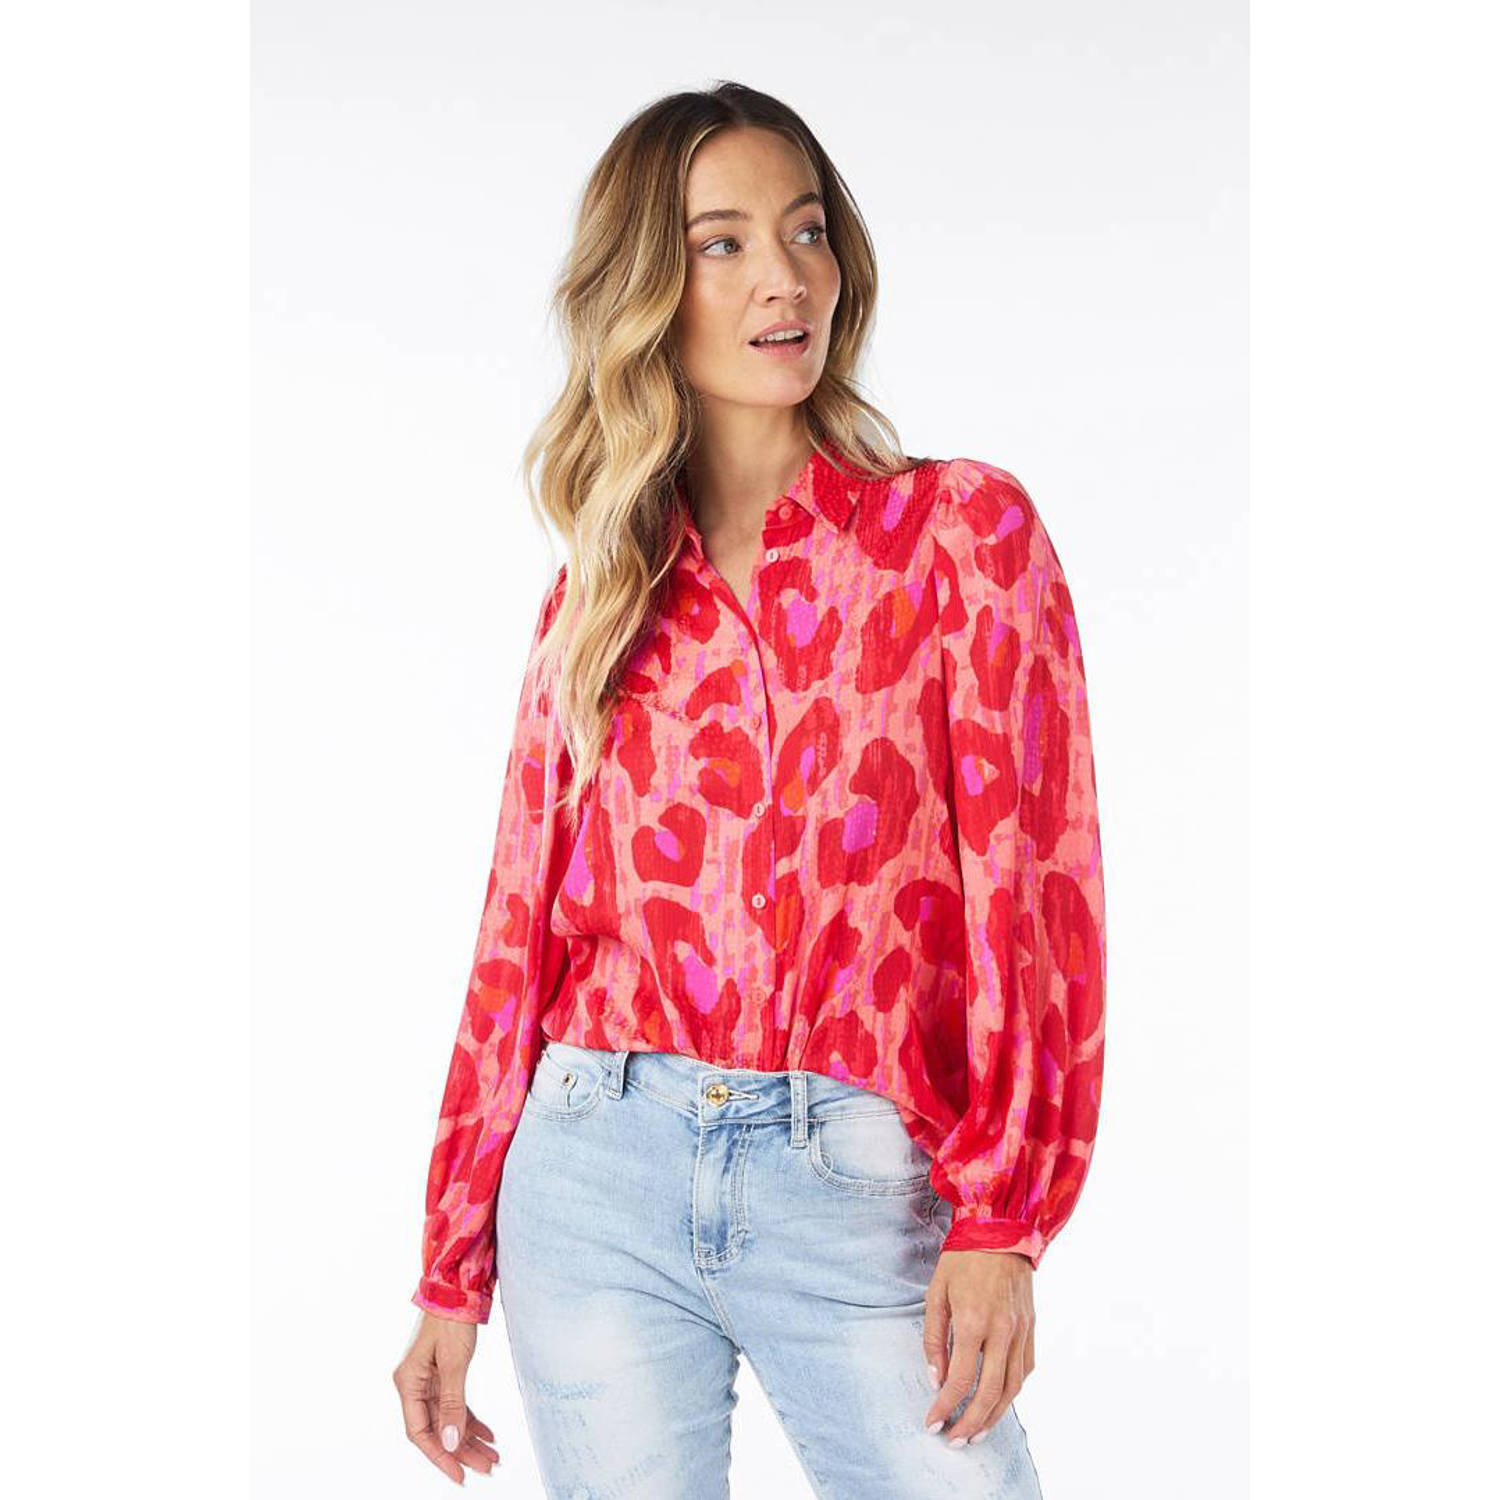 Esqualo blouse met all over print roze rood